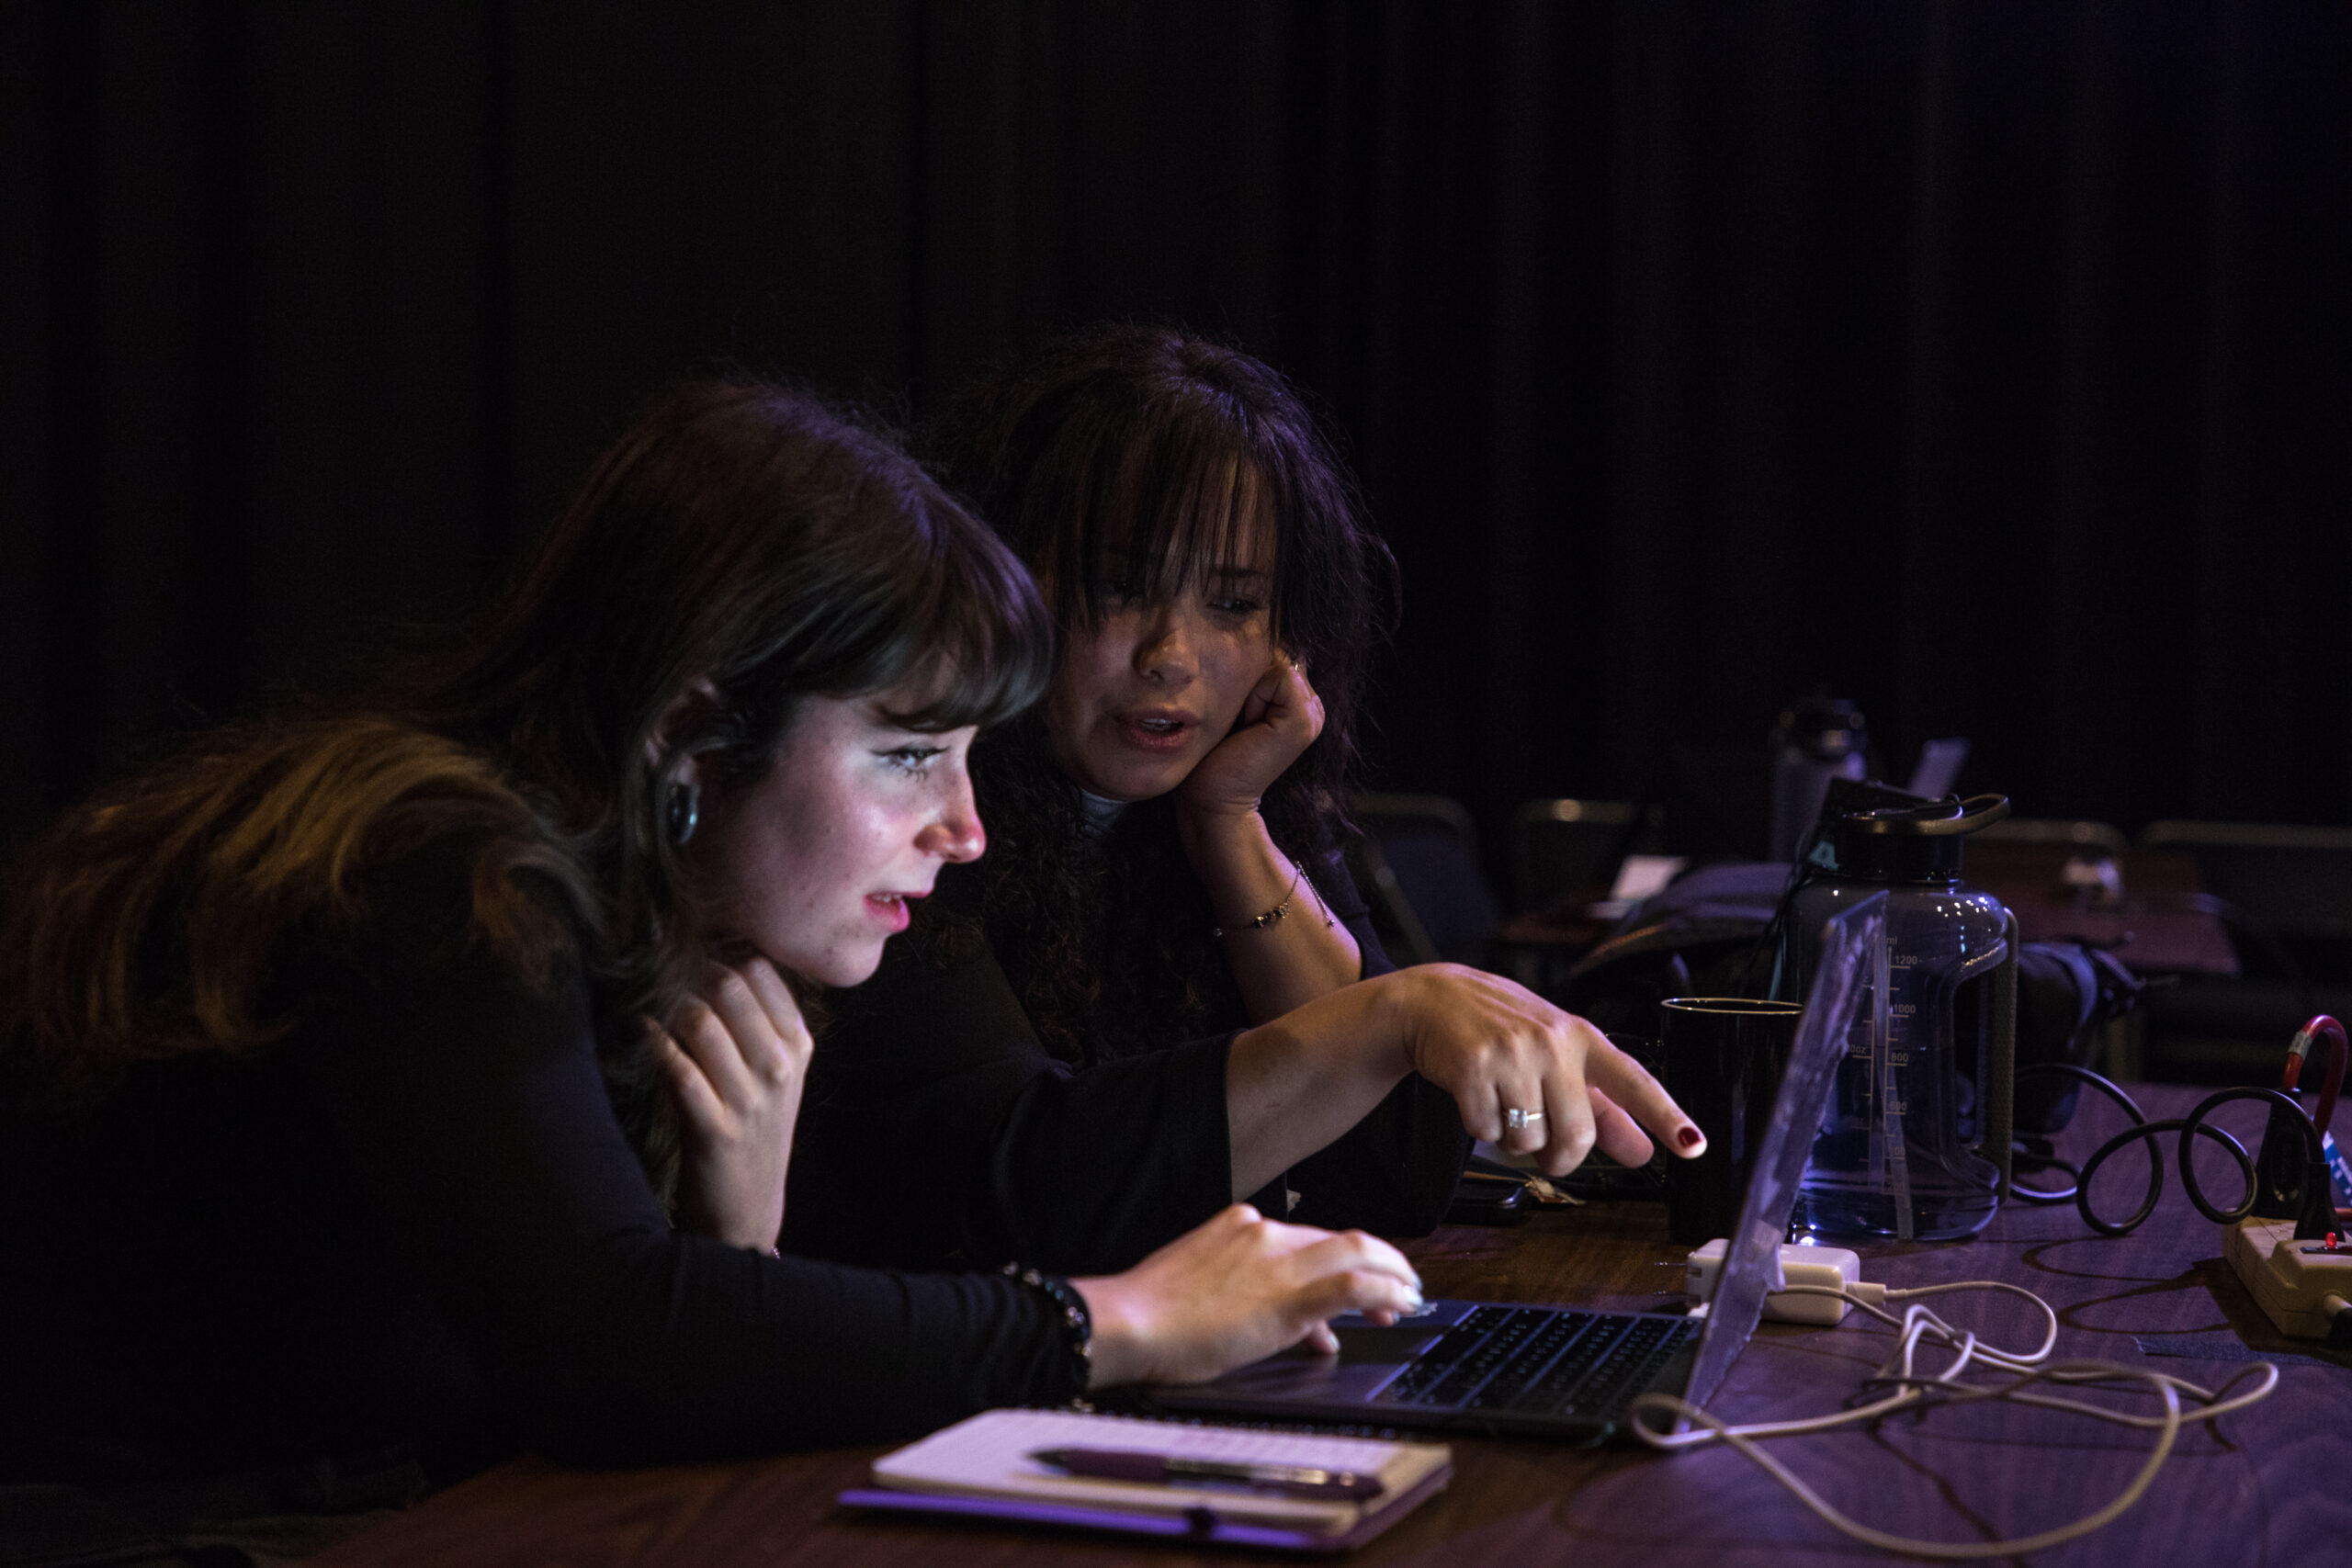 Sitting at a table, two women work on a laptop talking to one another. A notepad, pen and water bottle surround the laptop.